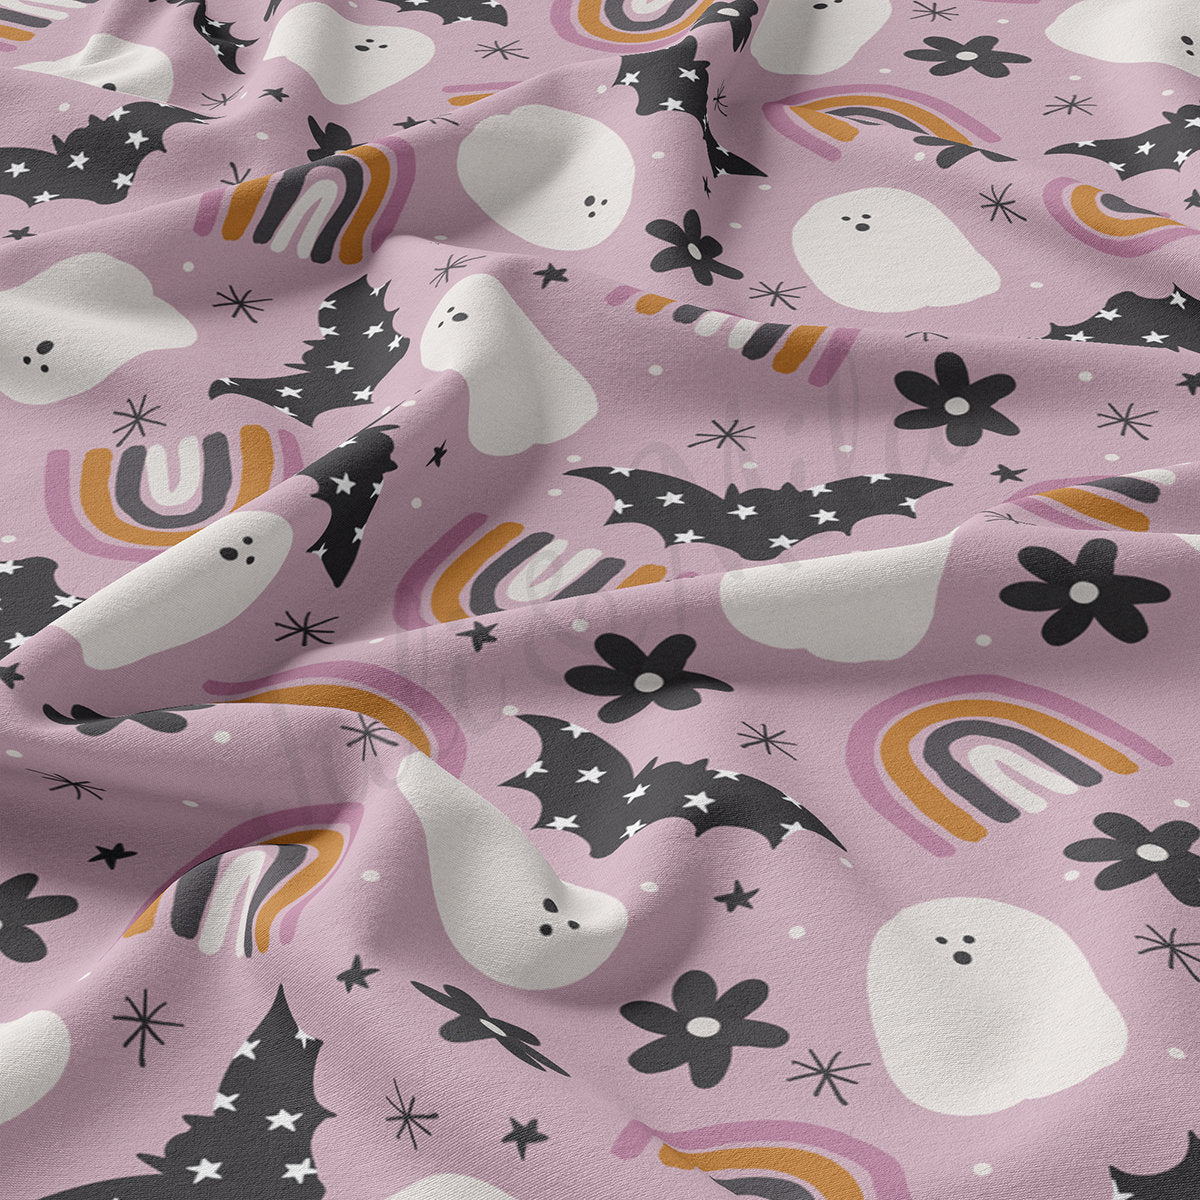 Double Brushed Polyester Fabric DBP1836 Halloween Autumn Fall